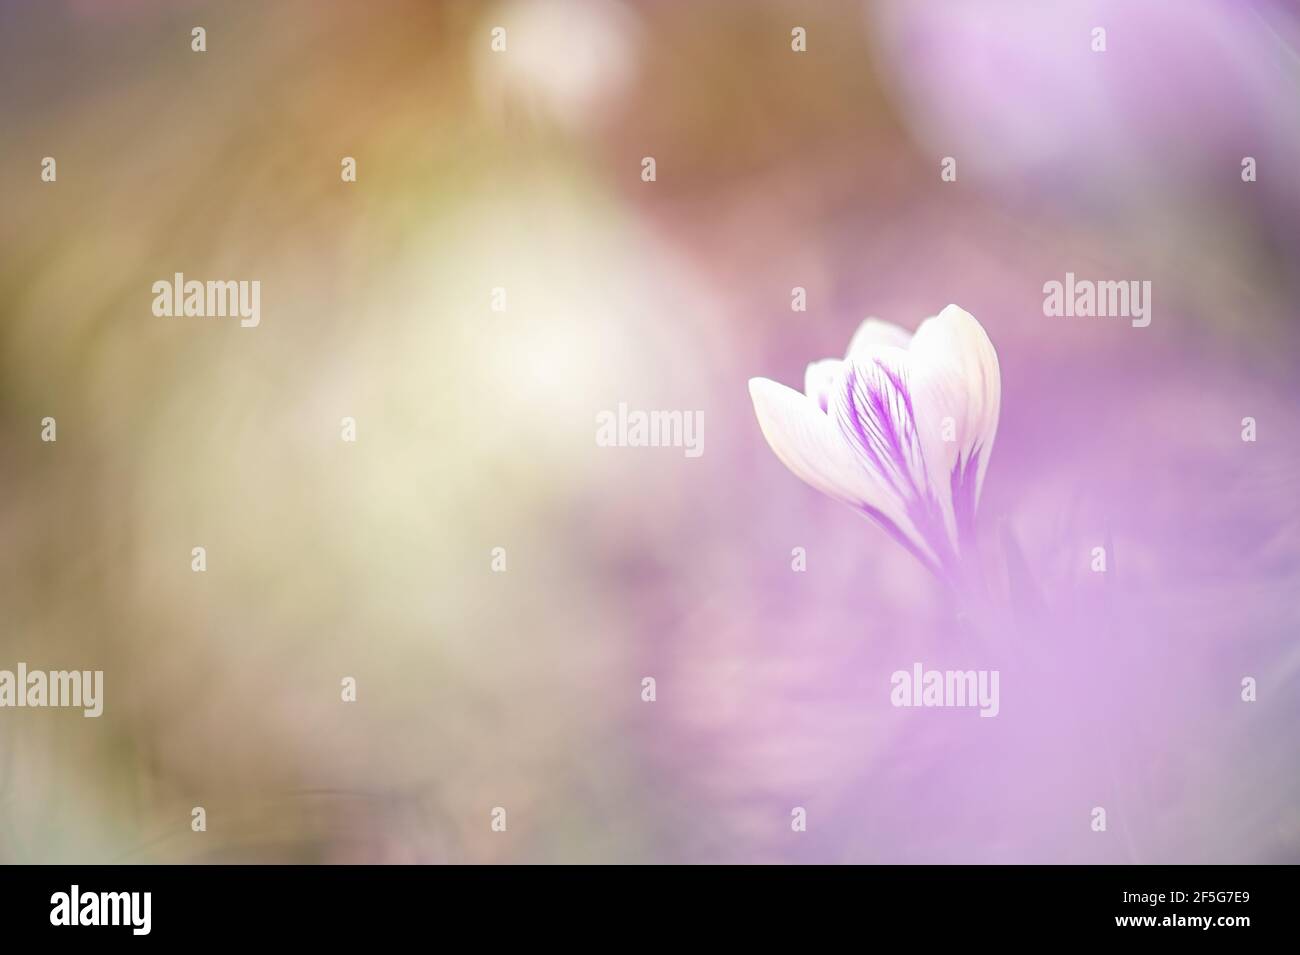 Single white and purple crocus flower on right of frame with brown and white blurred background with empty space. Stock Photo